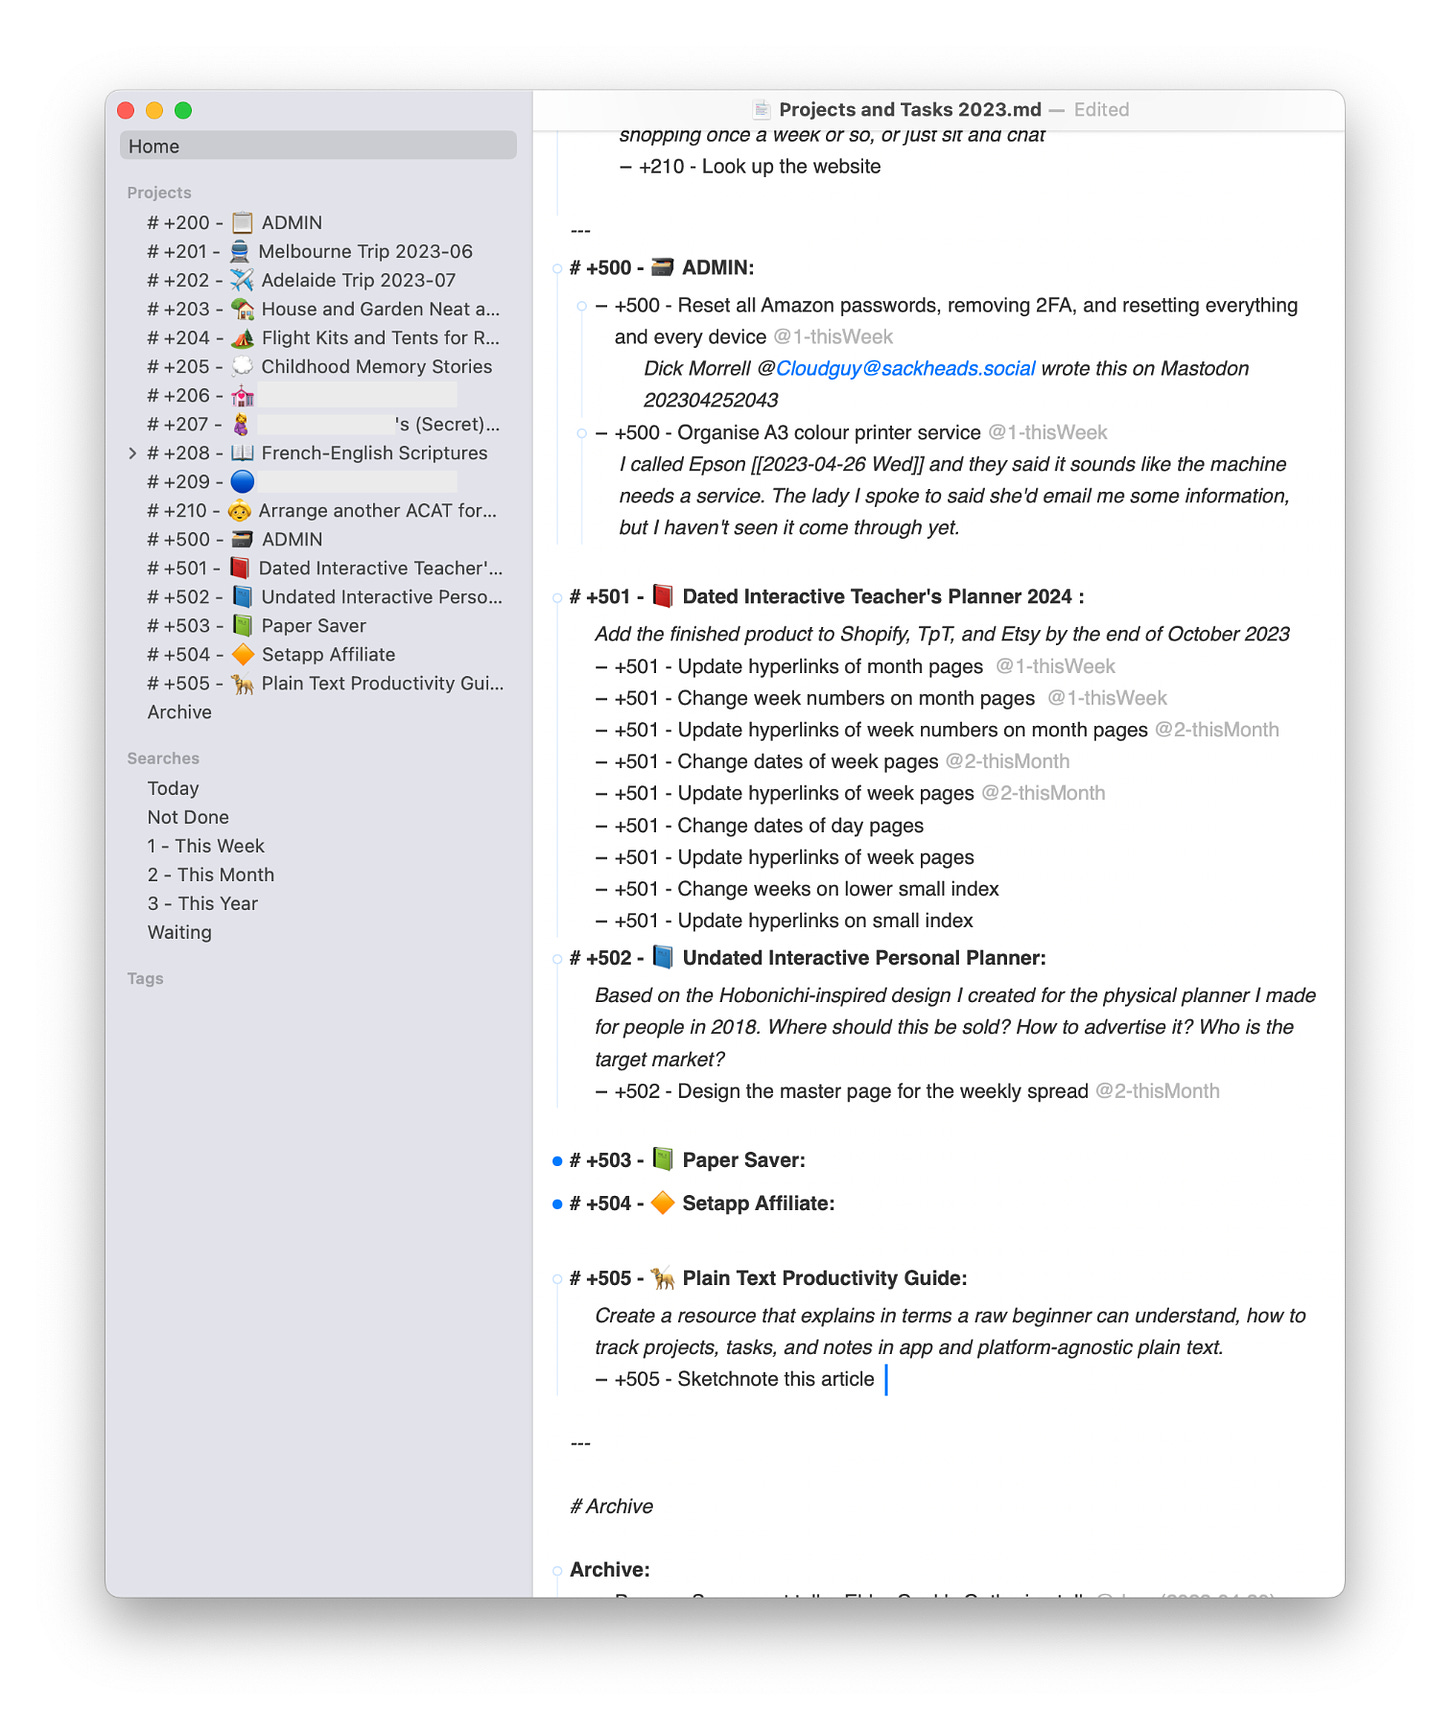 TaskPaper app window with a Mac-esque shadow behind it. There’s a narrow column on the left with a grey background, listing all projects and saved searches. On the right is a wider column with a white background showing a list of projects and tasks following the TaskPaper syntax. Projects are preceded by a number, and include an emoji related to the topic.